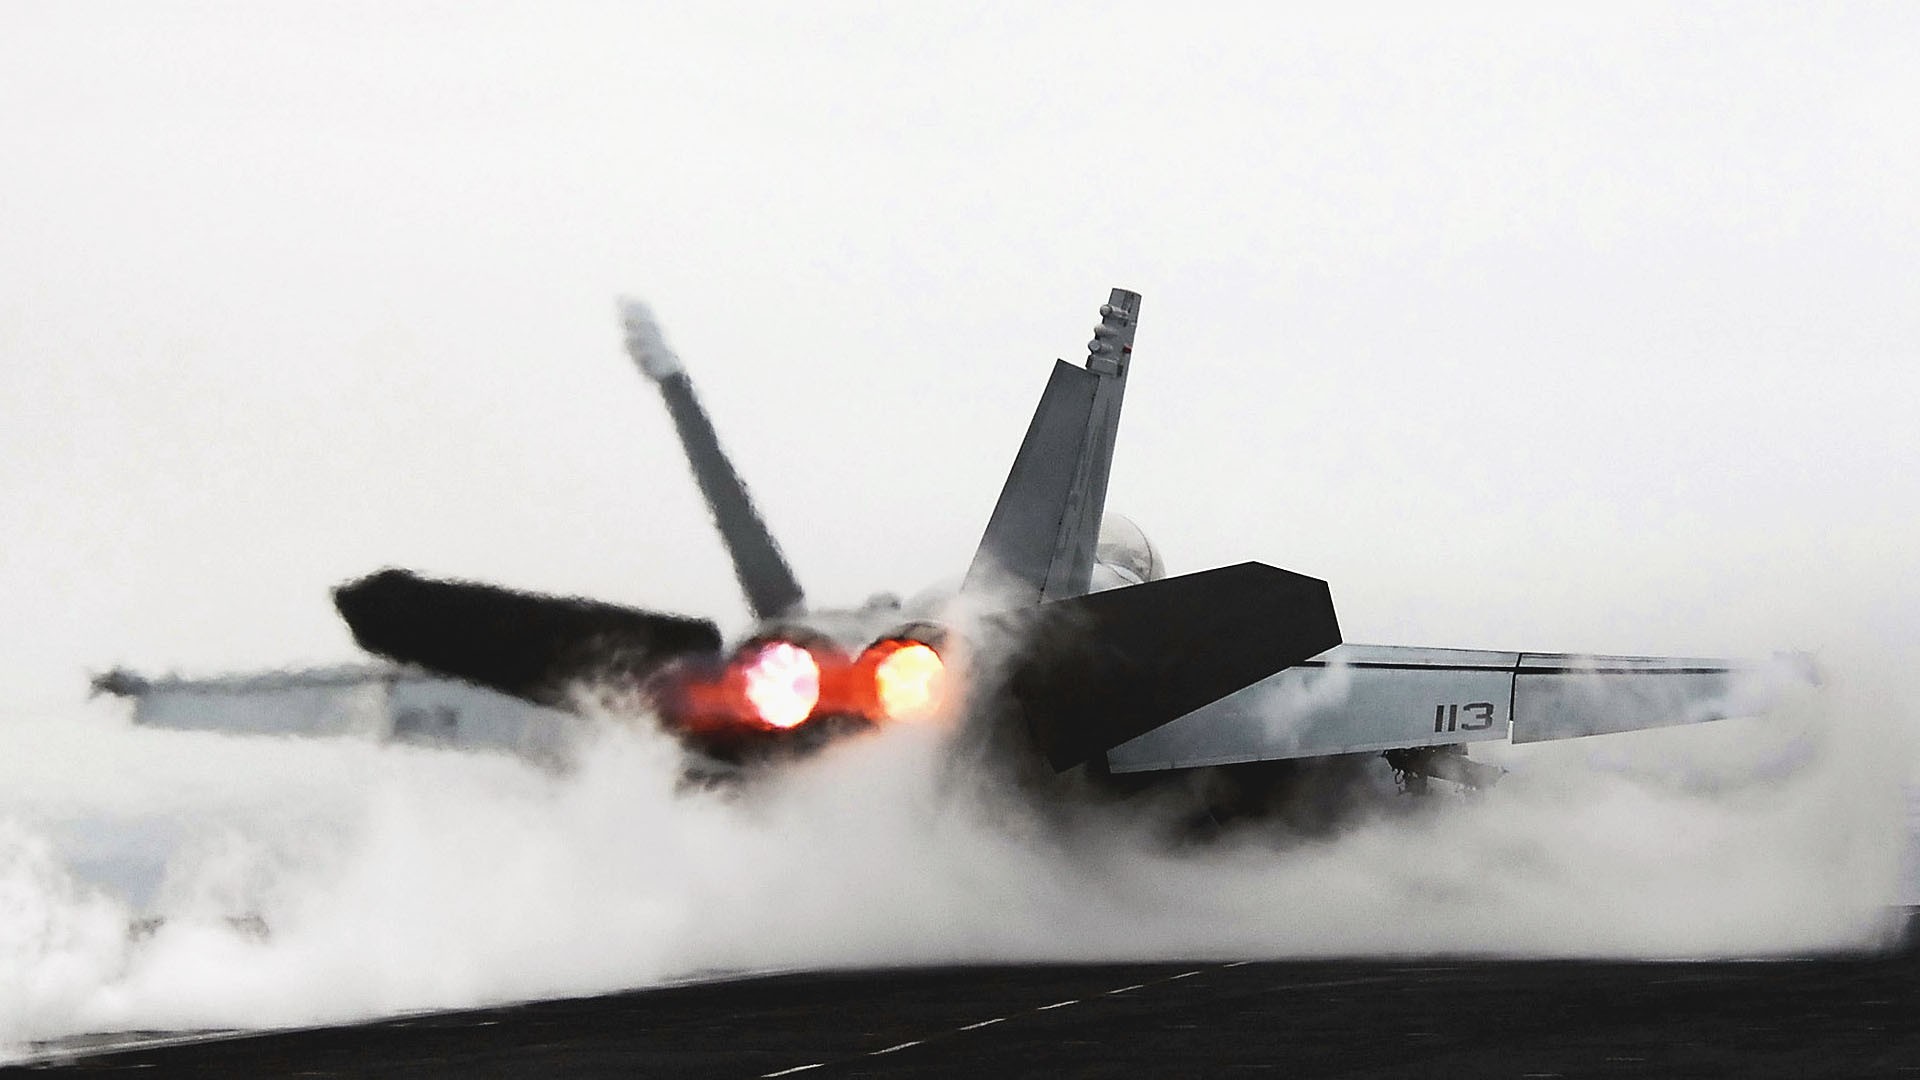 General 1920x1080 aircraft jets smoke military aircraft aircraft carrier military jet fighter vehicle